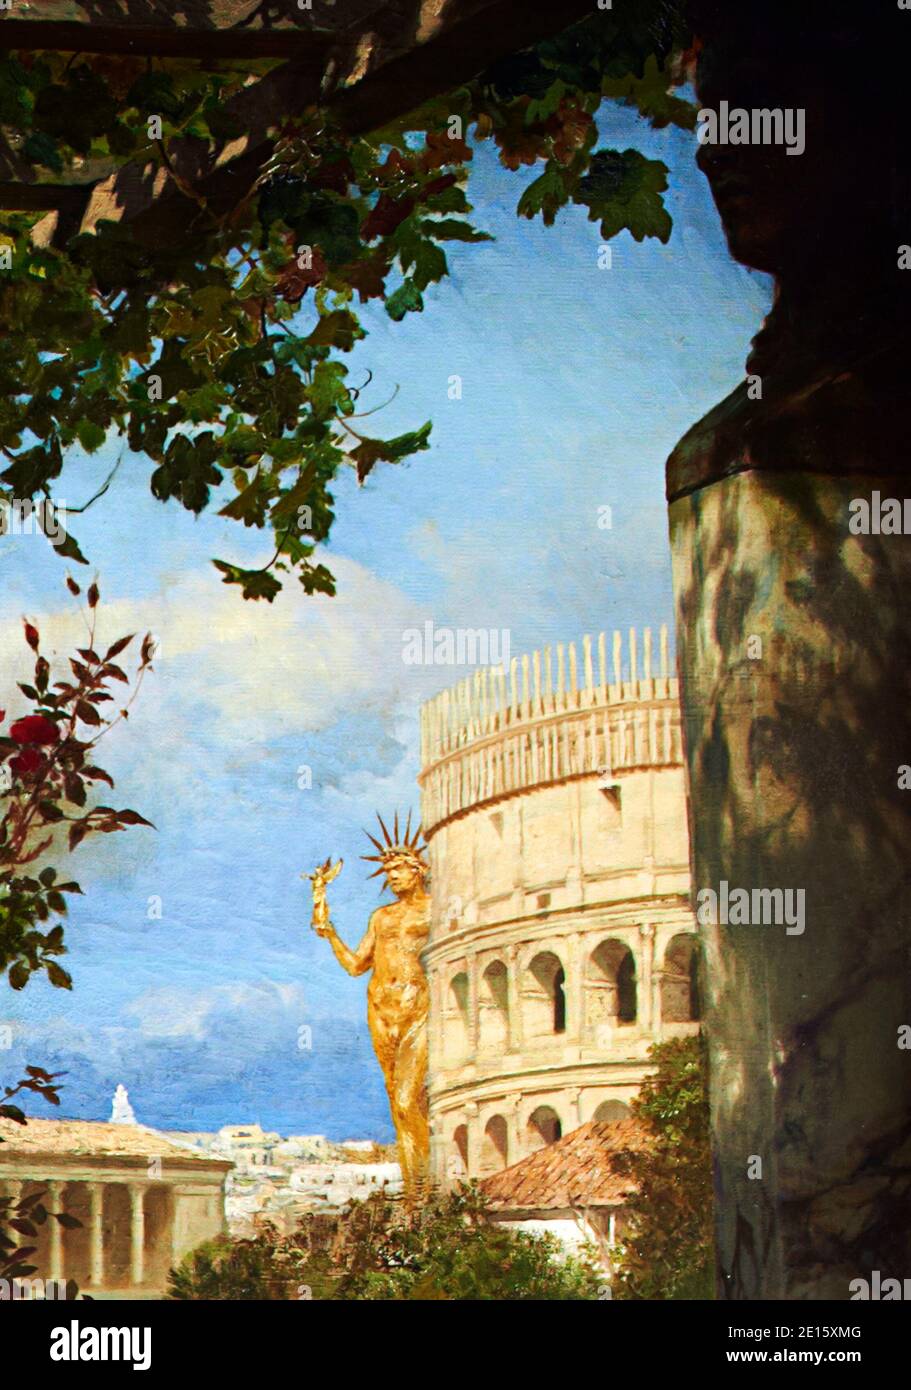 A painting of the Colosseum painted by Henryk H. Siemiradzki presented at the exhibit 'Nerone', examining the life and dark legends of Emperor Nero (37-68 AD), which opens in Rome ,Italy on April 12, 2011 across five different landmarks of the ancient imperial capital. Nero has been infamous throughout history for tyranny, extravagance, cold-blooded murder, and cruel persecution of Christians. Ancient Roman historians accused him of killing his mother, stepbrother and two wives, and of burning Christians at night in his garden for firelight. He was known as the emperor 'who fiddled while Rome Stock Photo